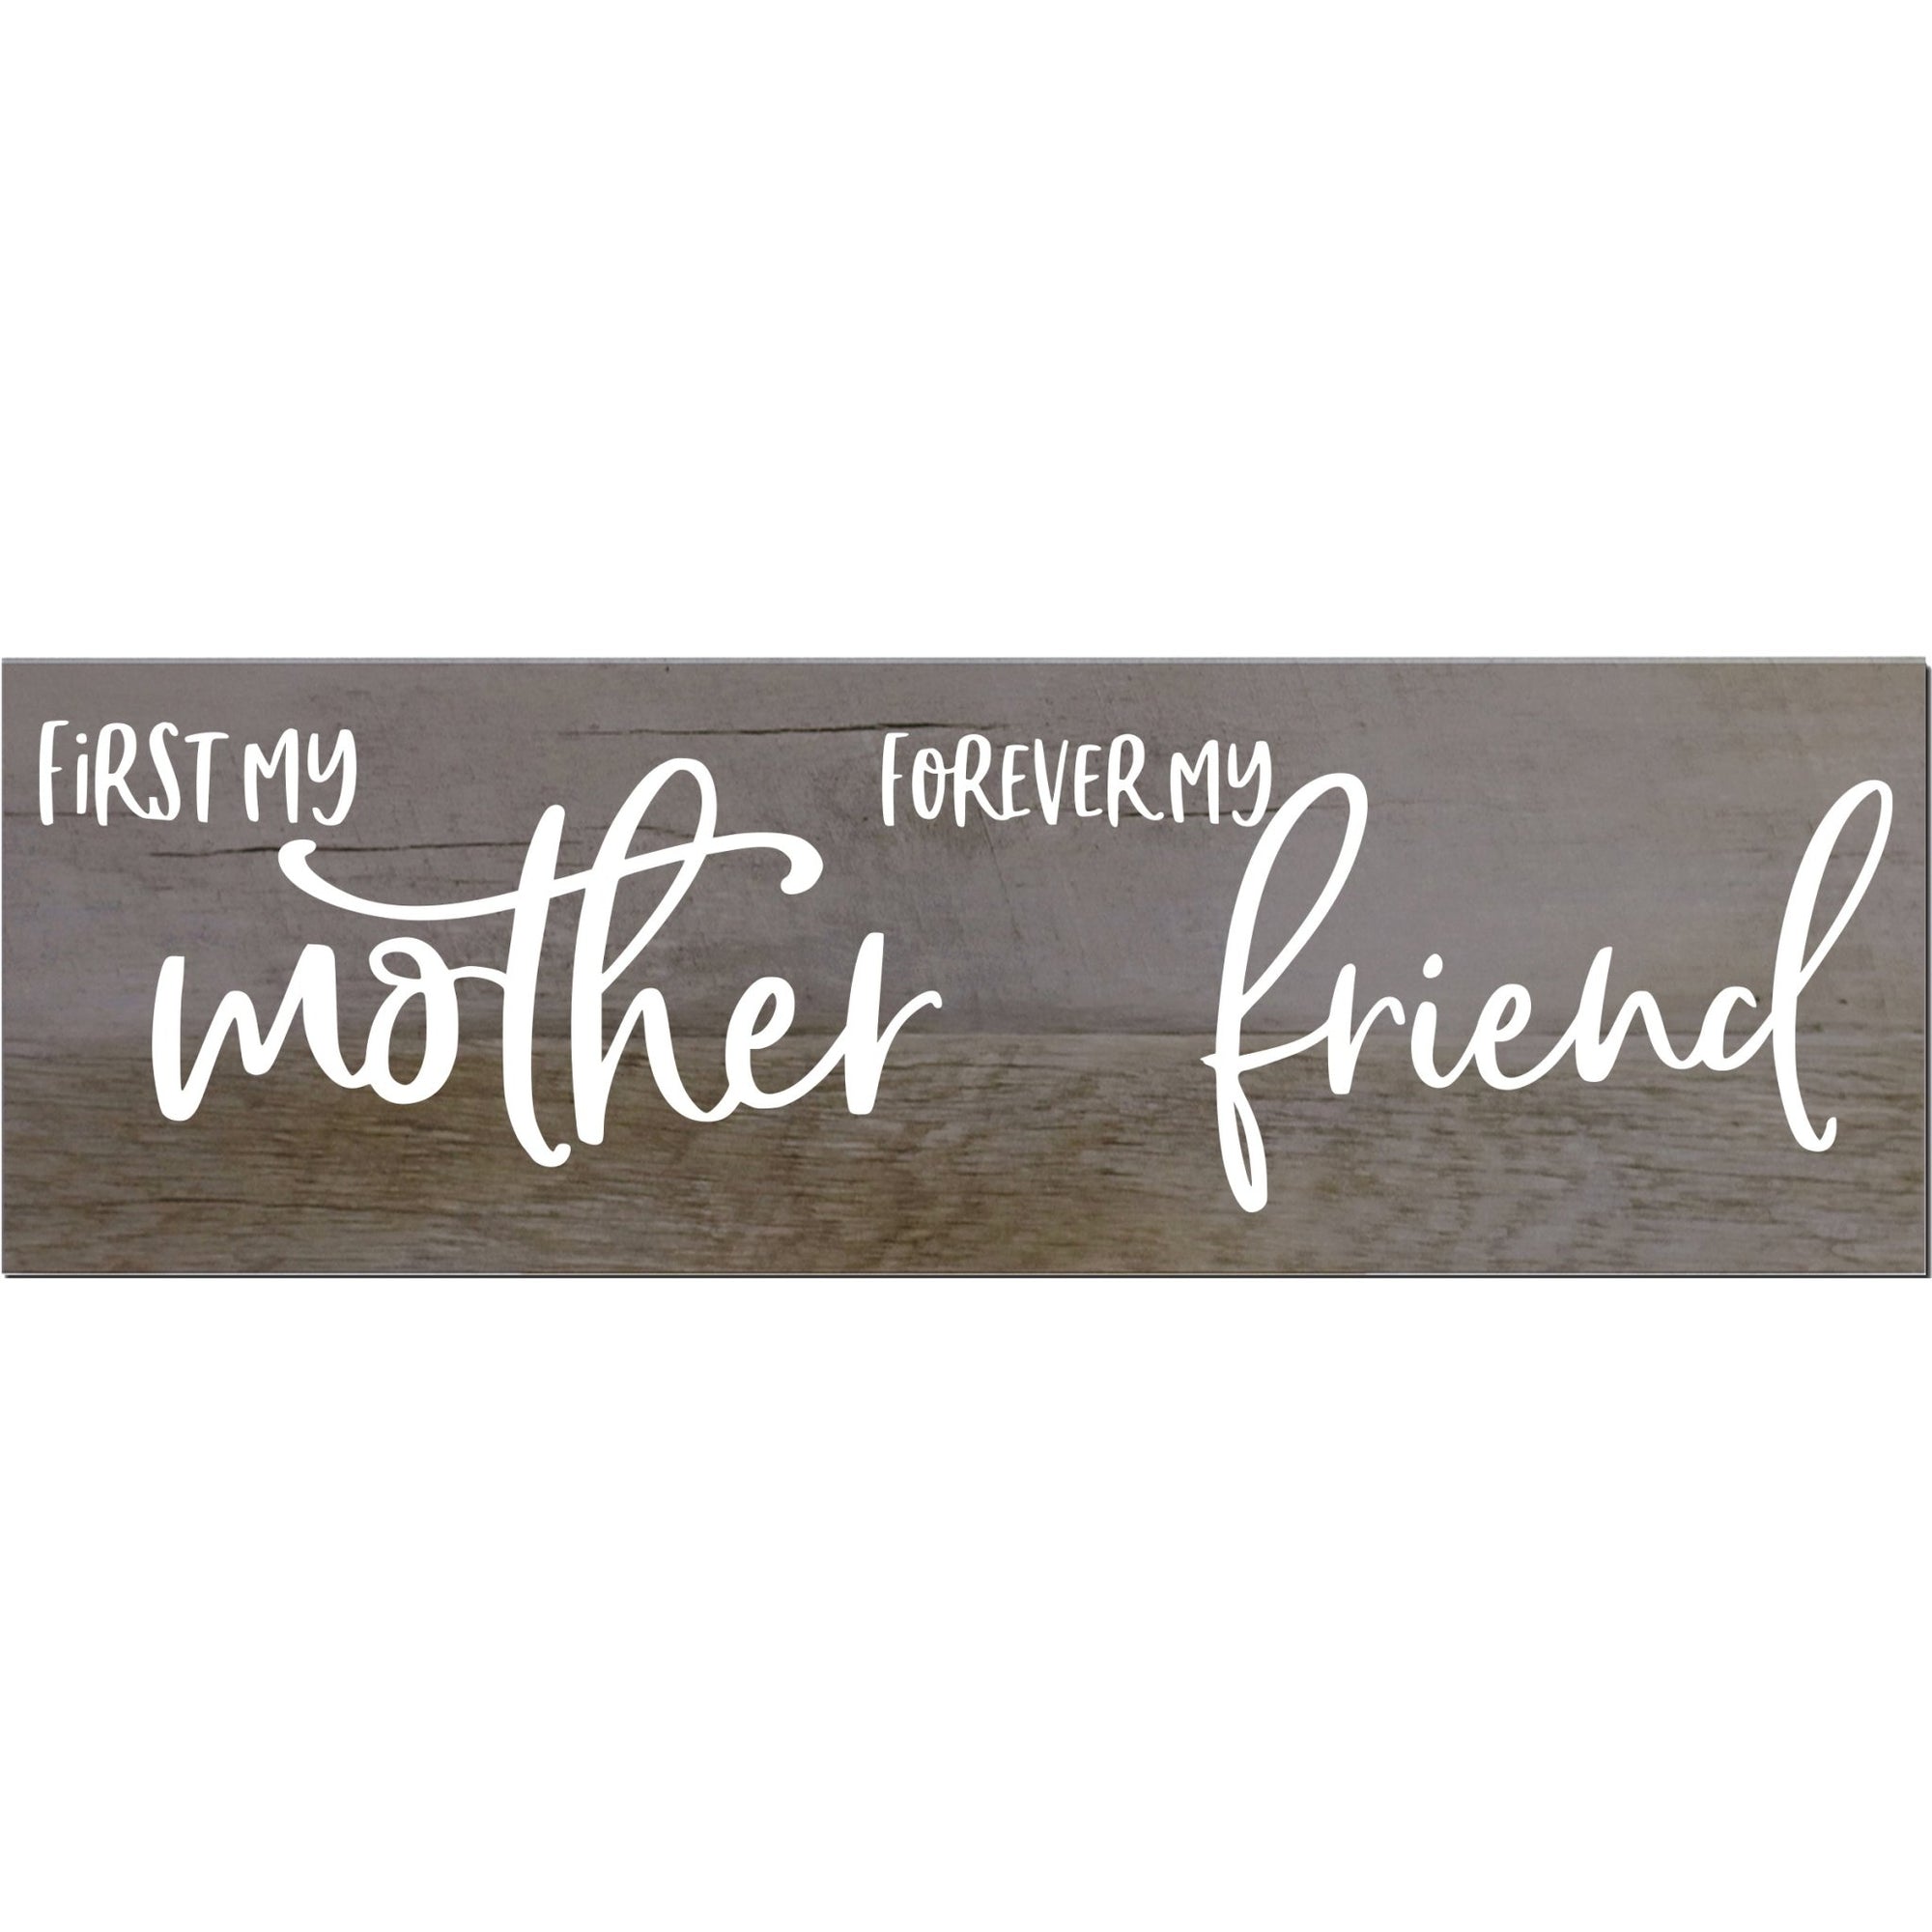 Modern Inspirational Wooden Wall Art Hanging Plaque 22.5x6 - First My Mother Forever My Friend - for Family and Home Decorations - LifeSong Milestones